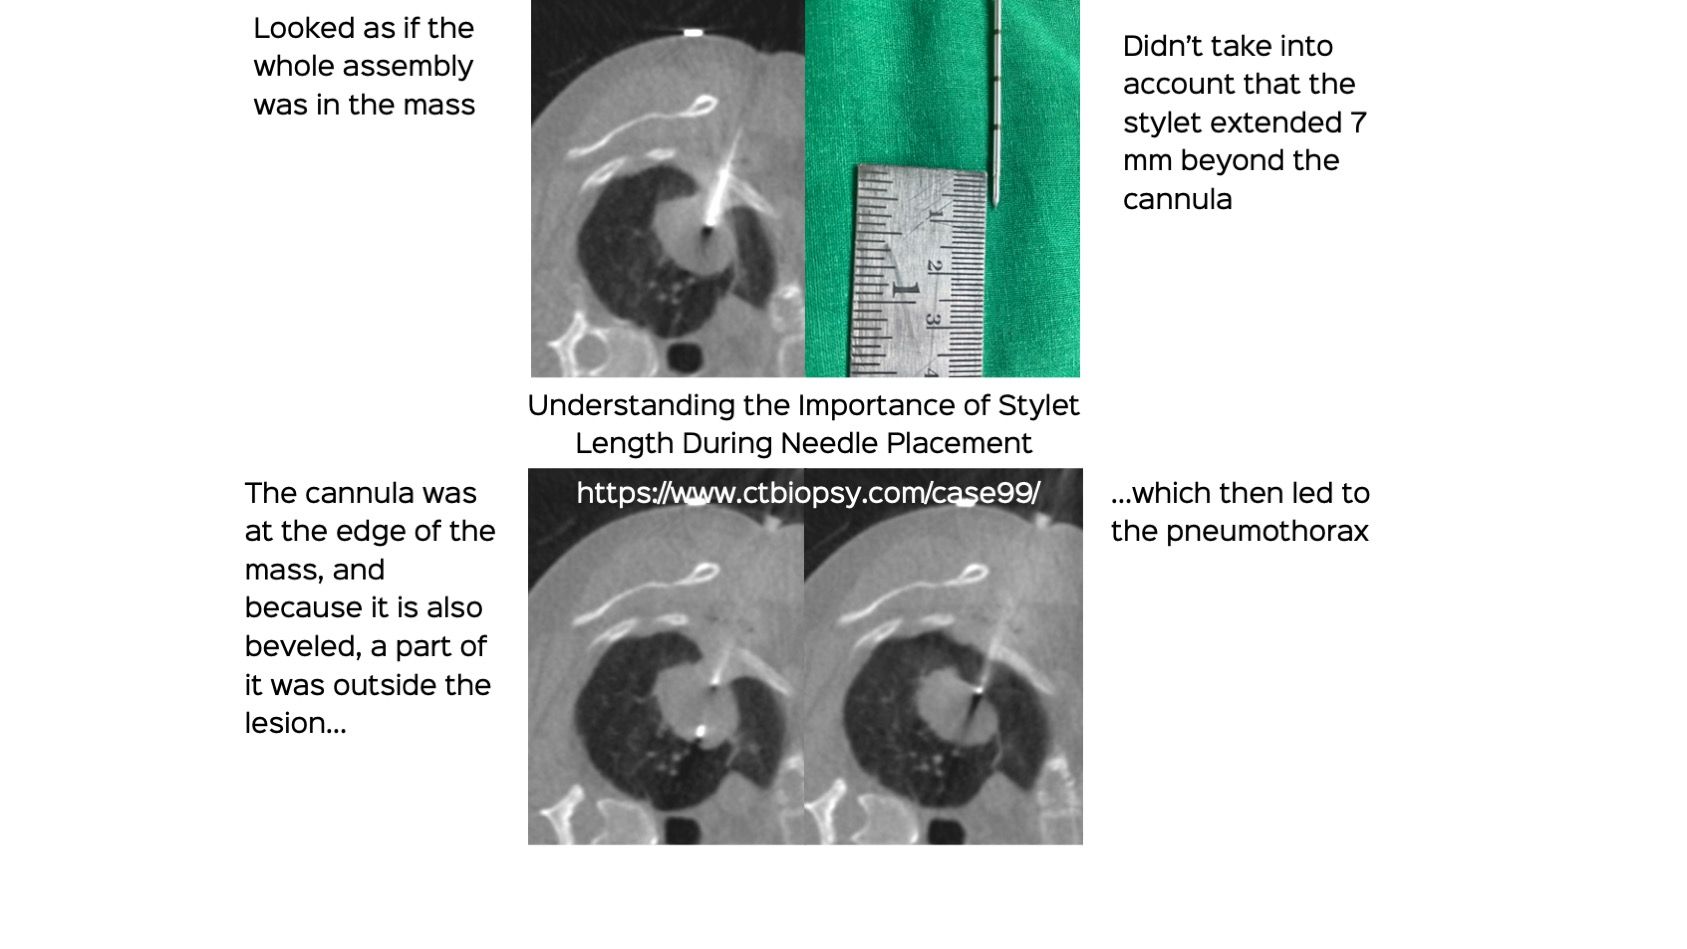 Case 99: Understanding the Importance of Stylet Length During Needle Placement